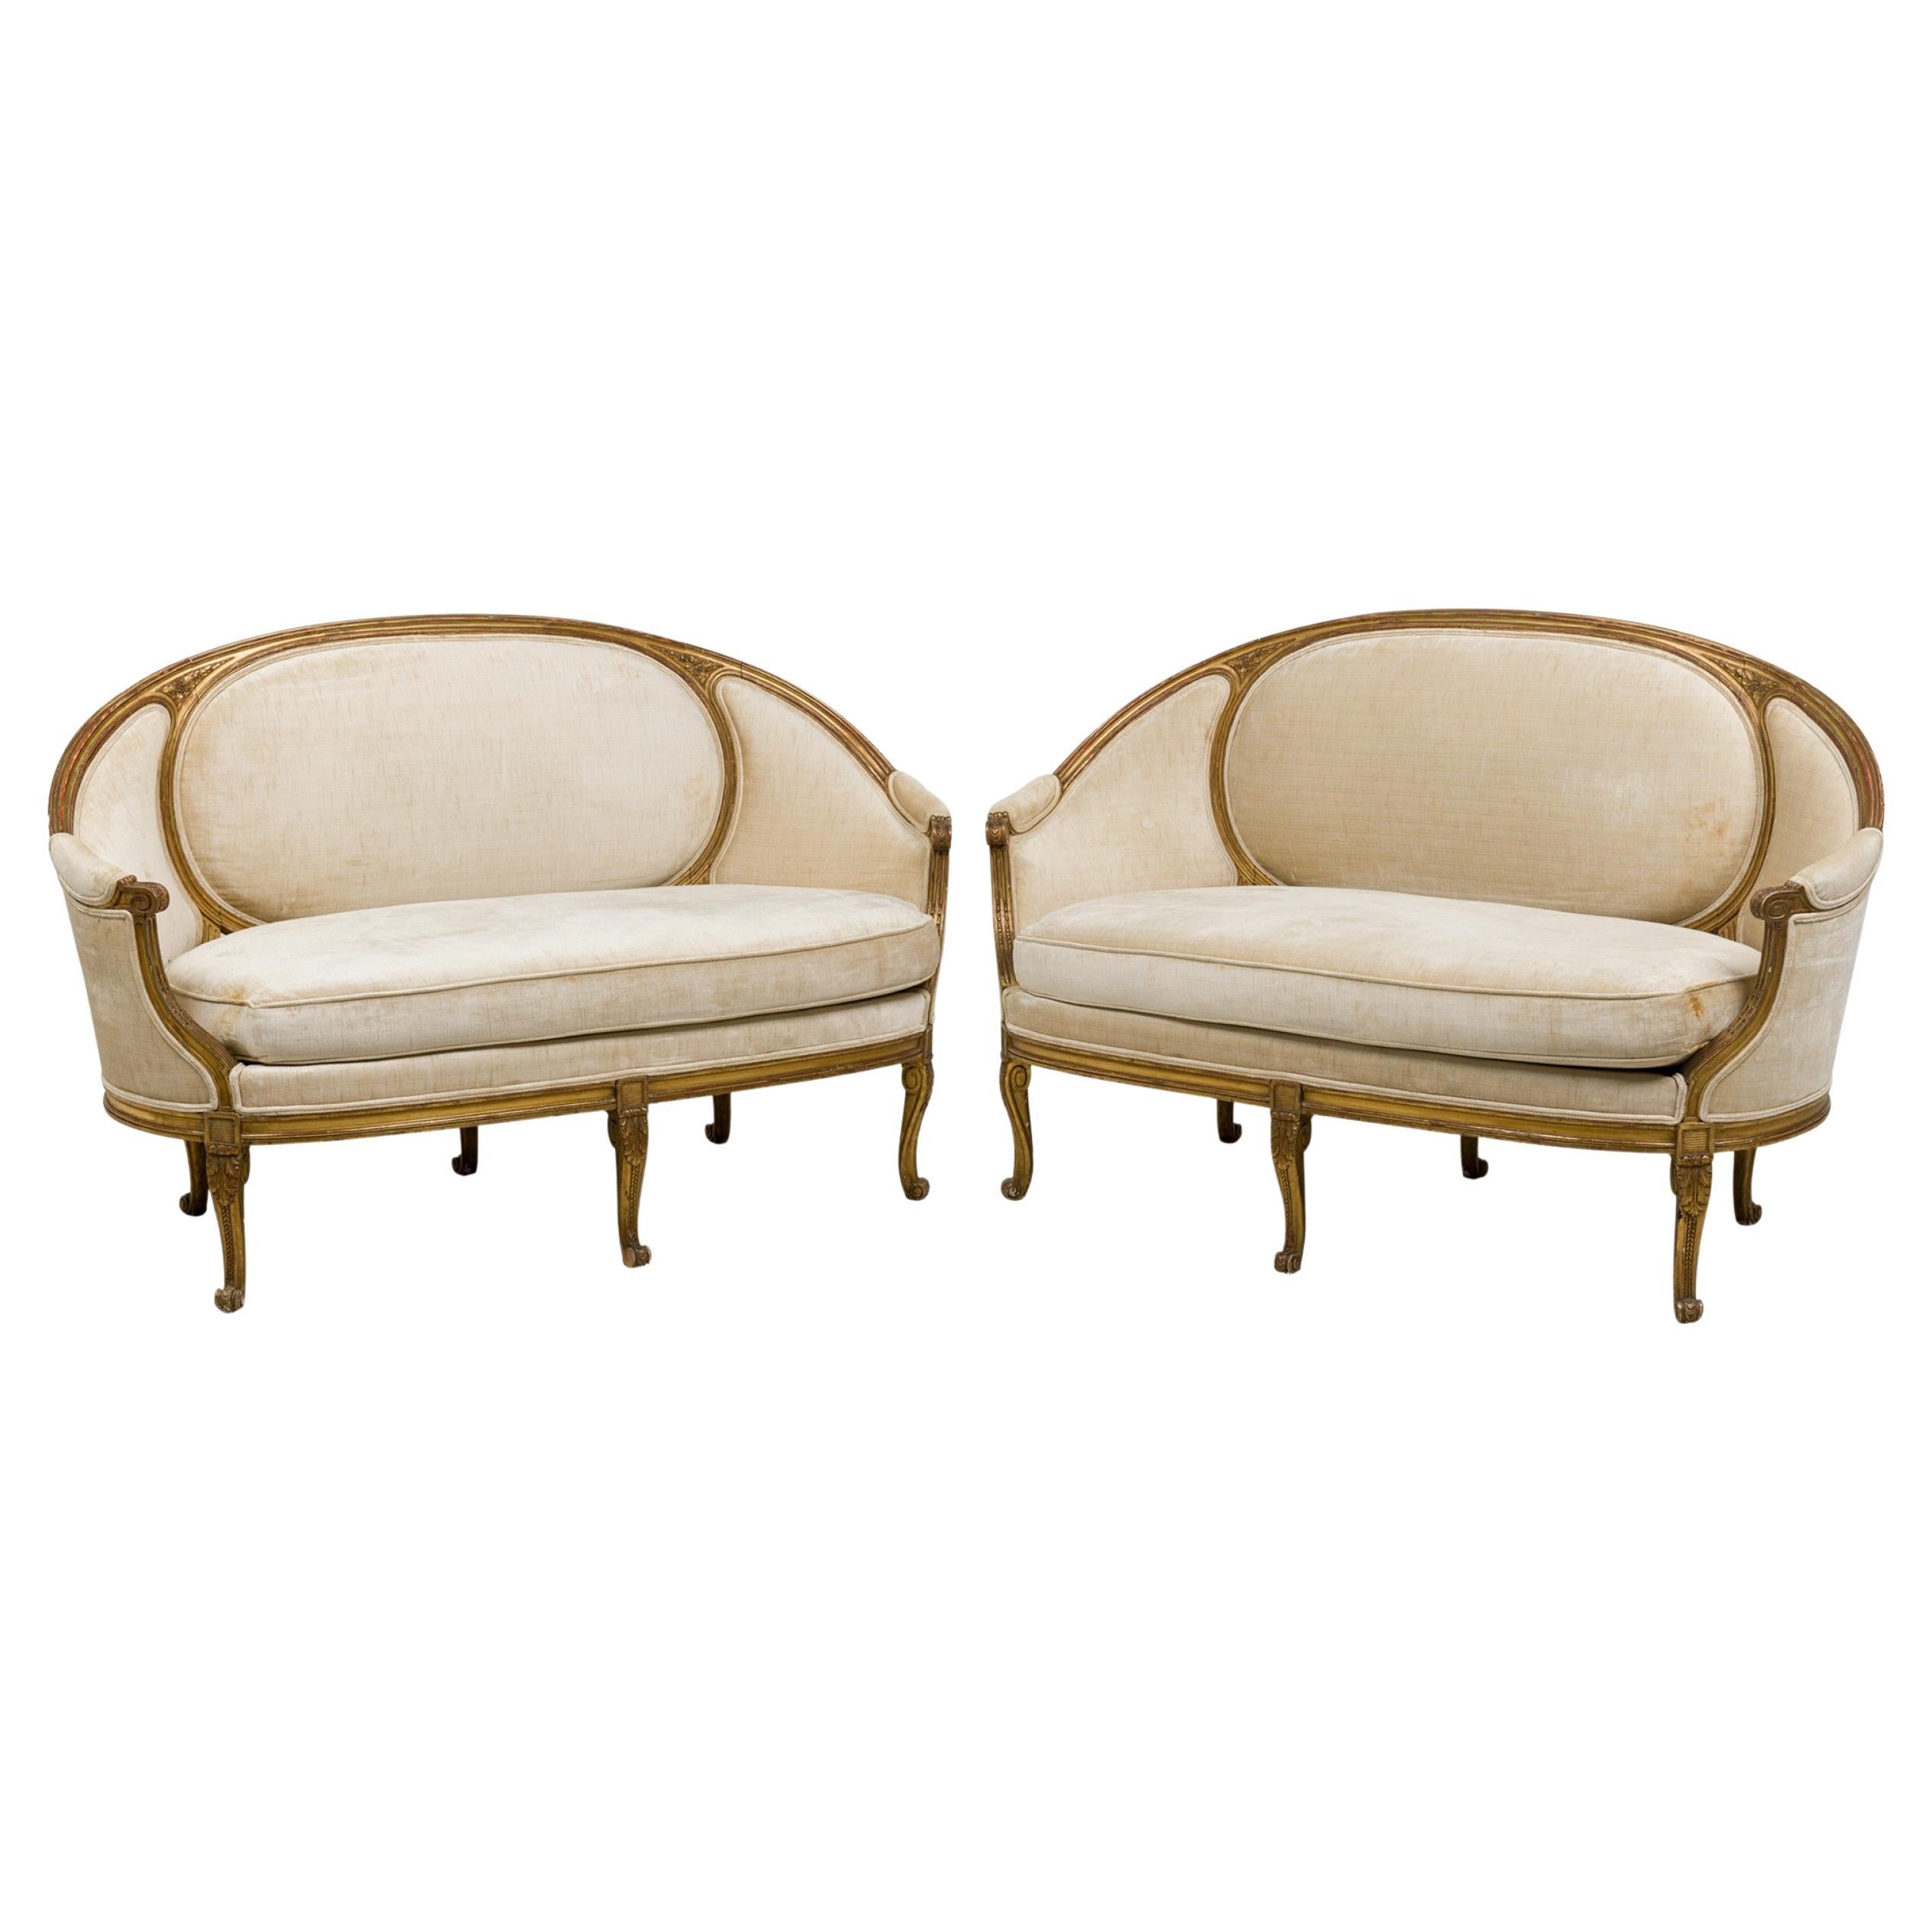 Pair of French Louis XVI Giltwood Beige Upholstered Canapes / Settees For Sale